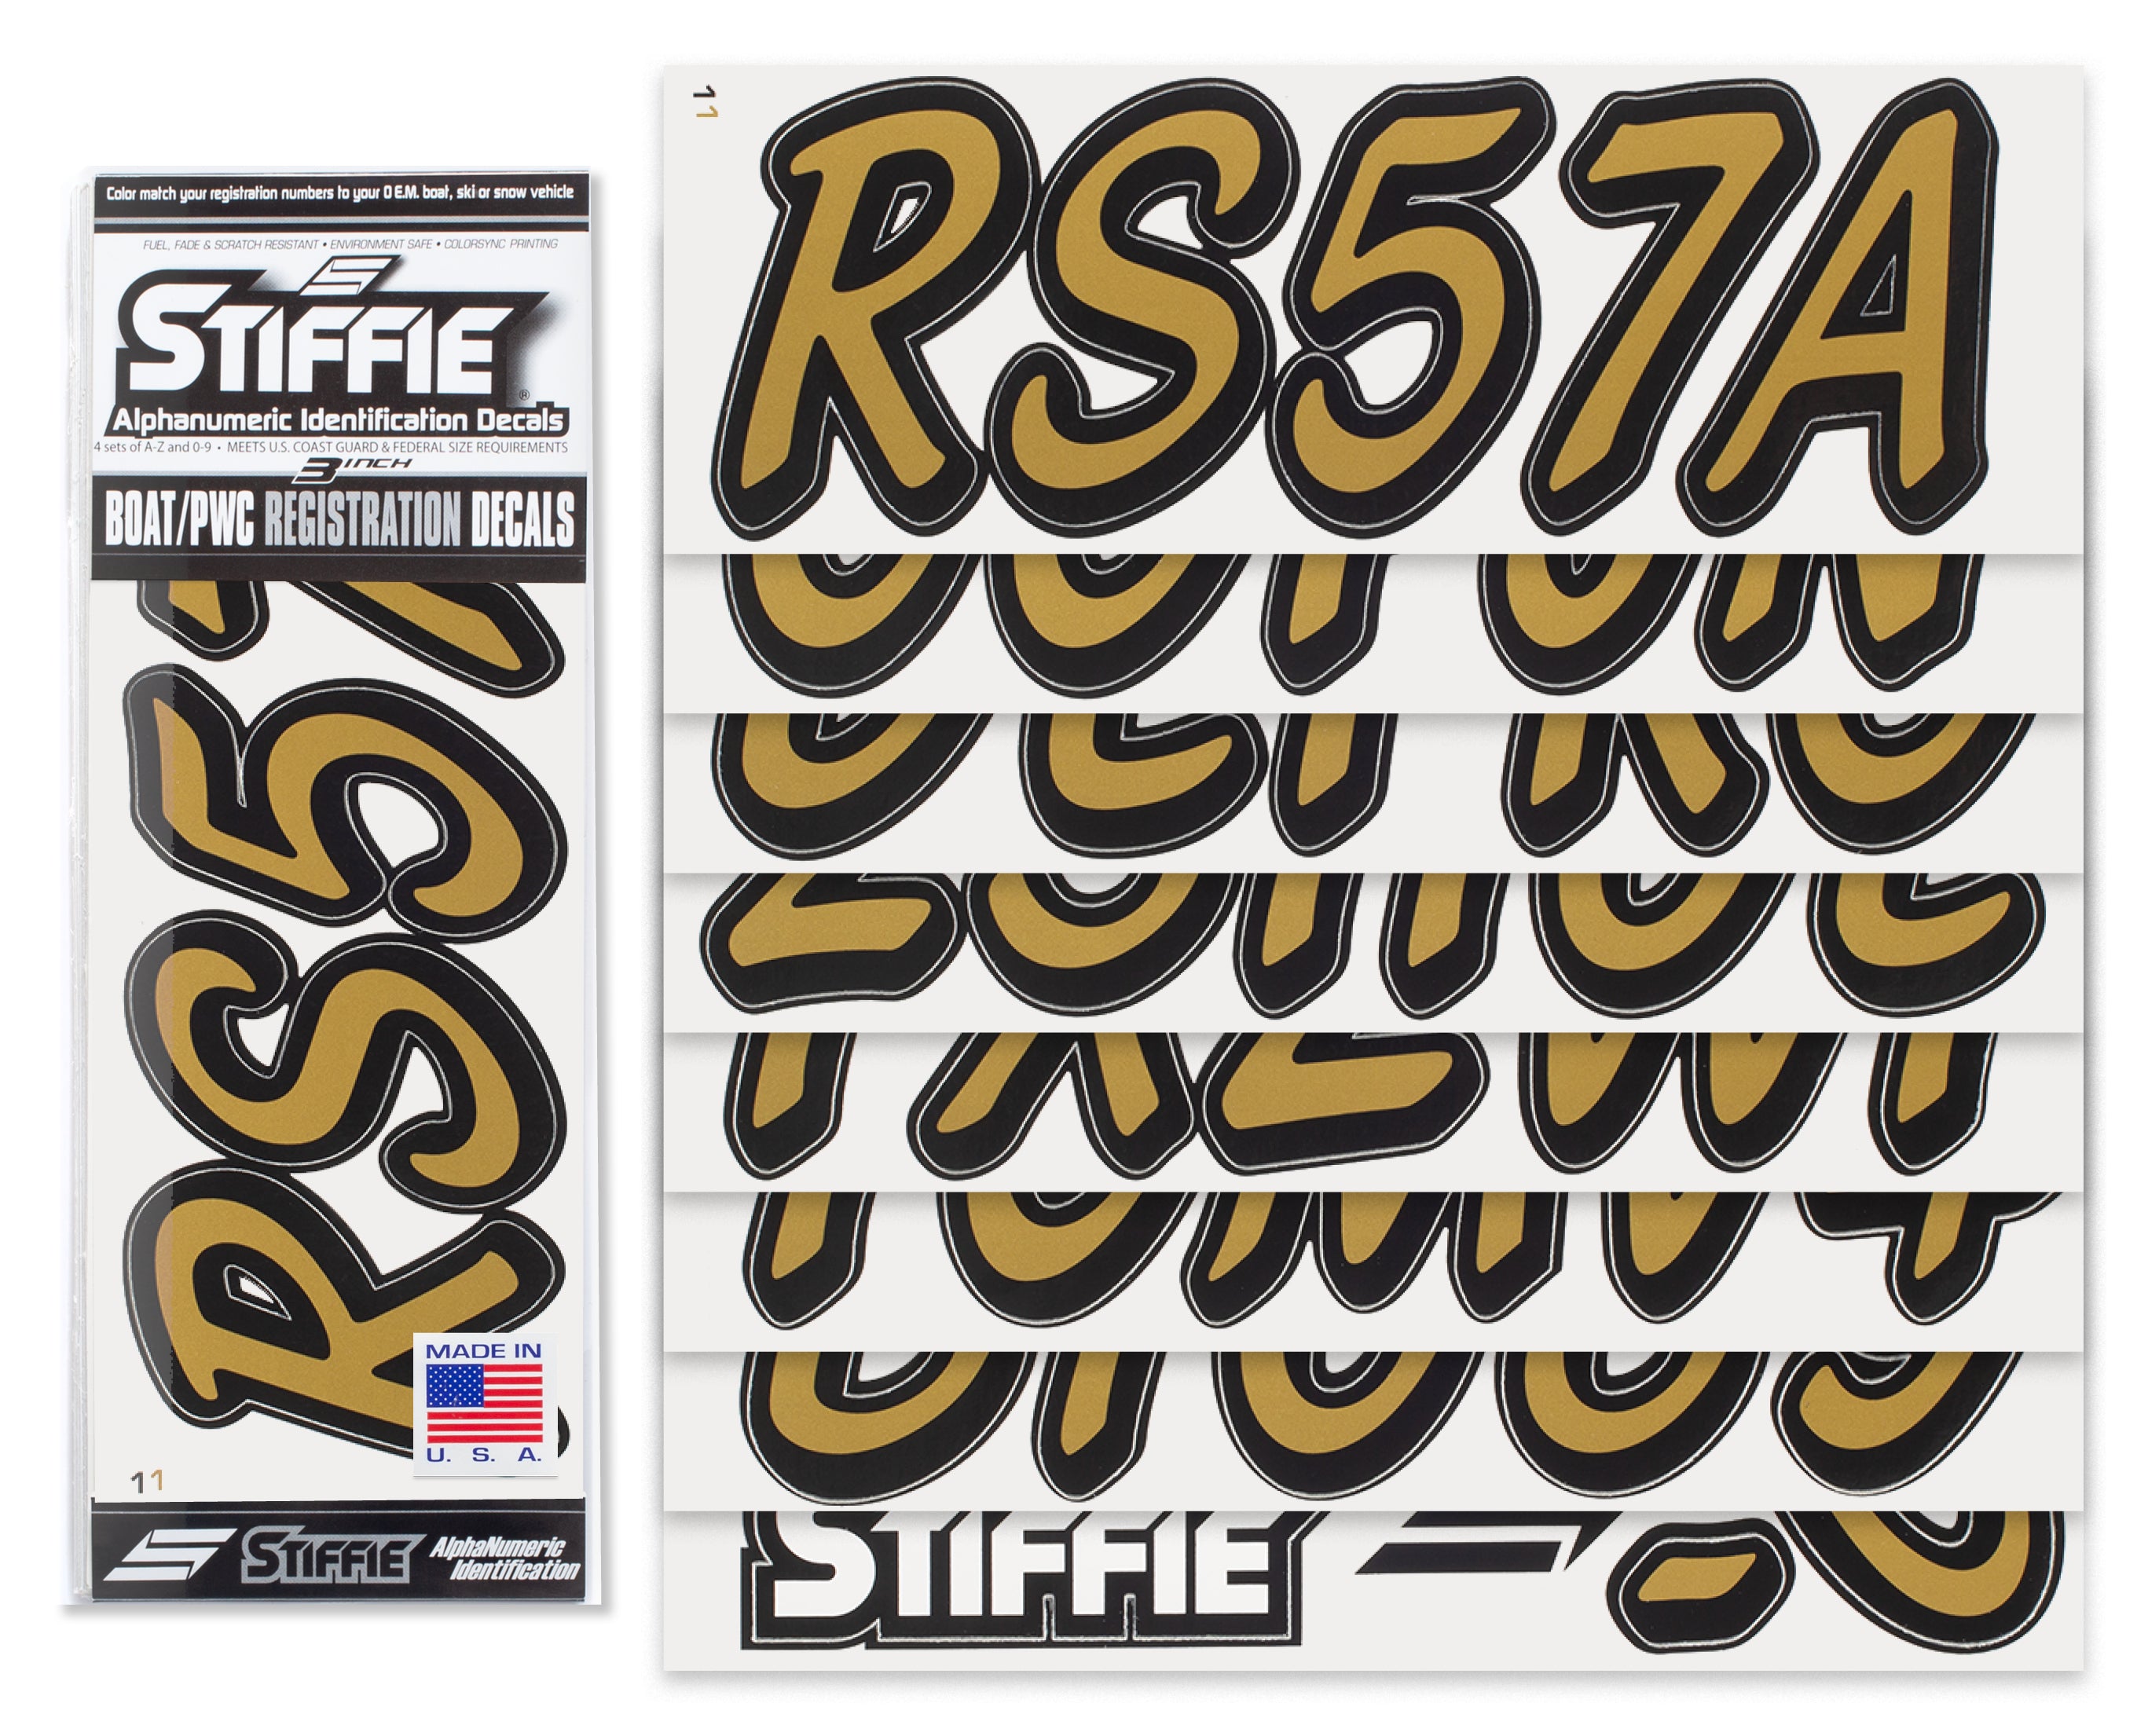 STIFFIE Whipline Solid Metallic Gold/Black 3" Alpha-Numeric Registration Identification Numbers Stickers Decals for Boats & Personal Watercraft